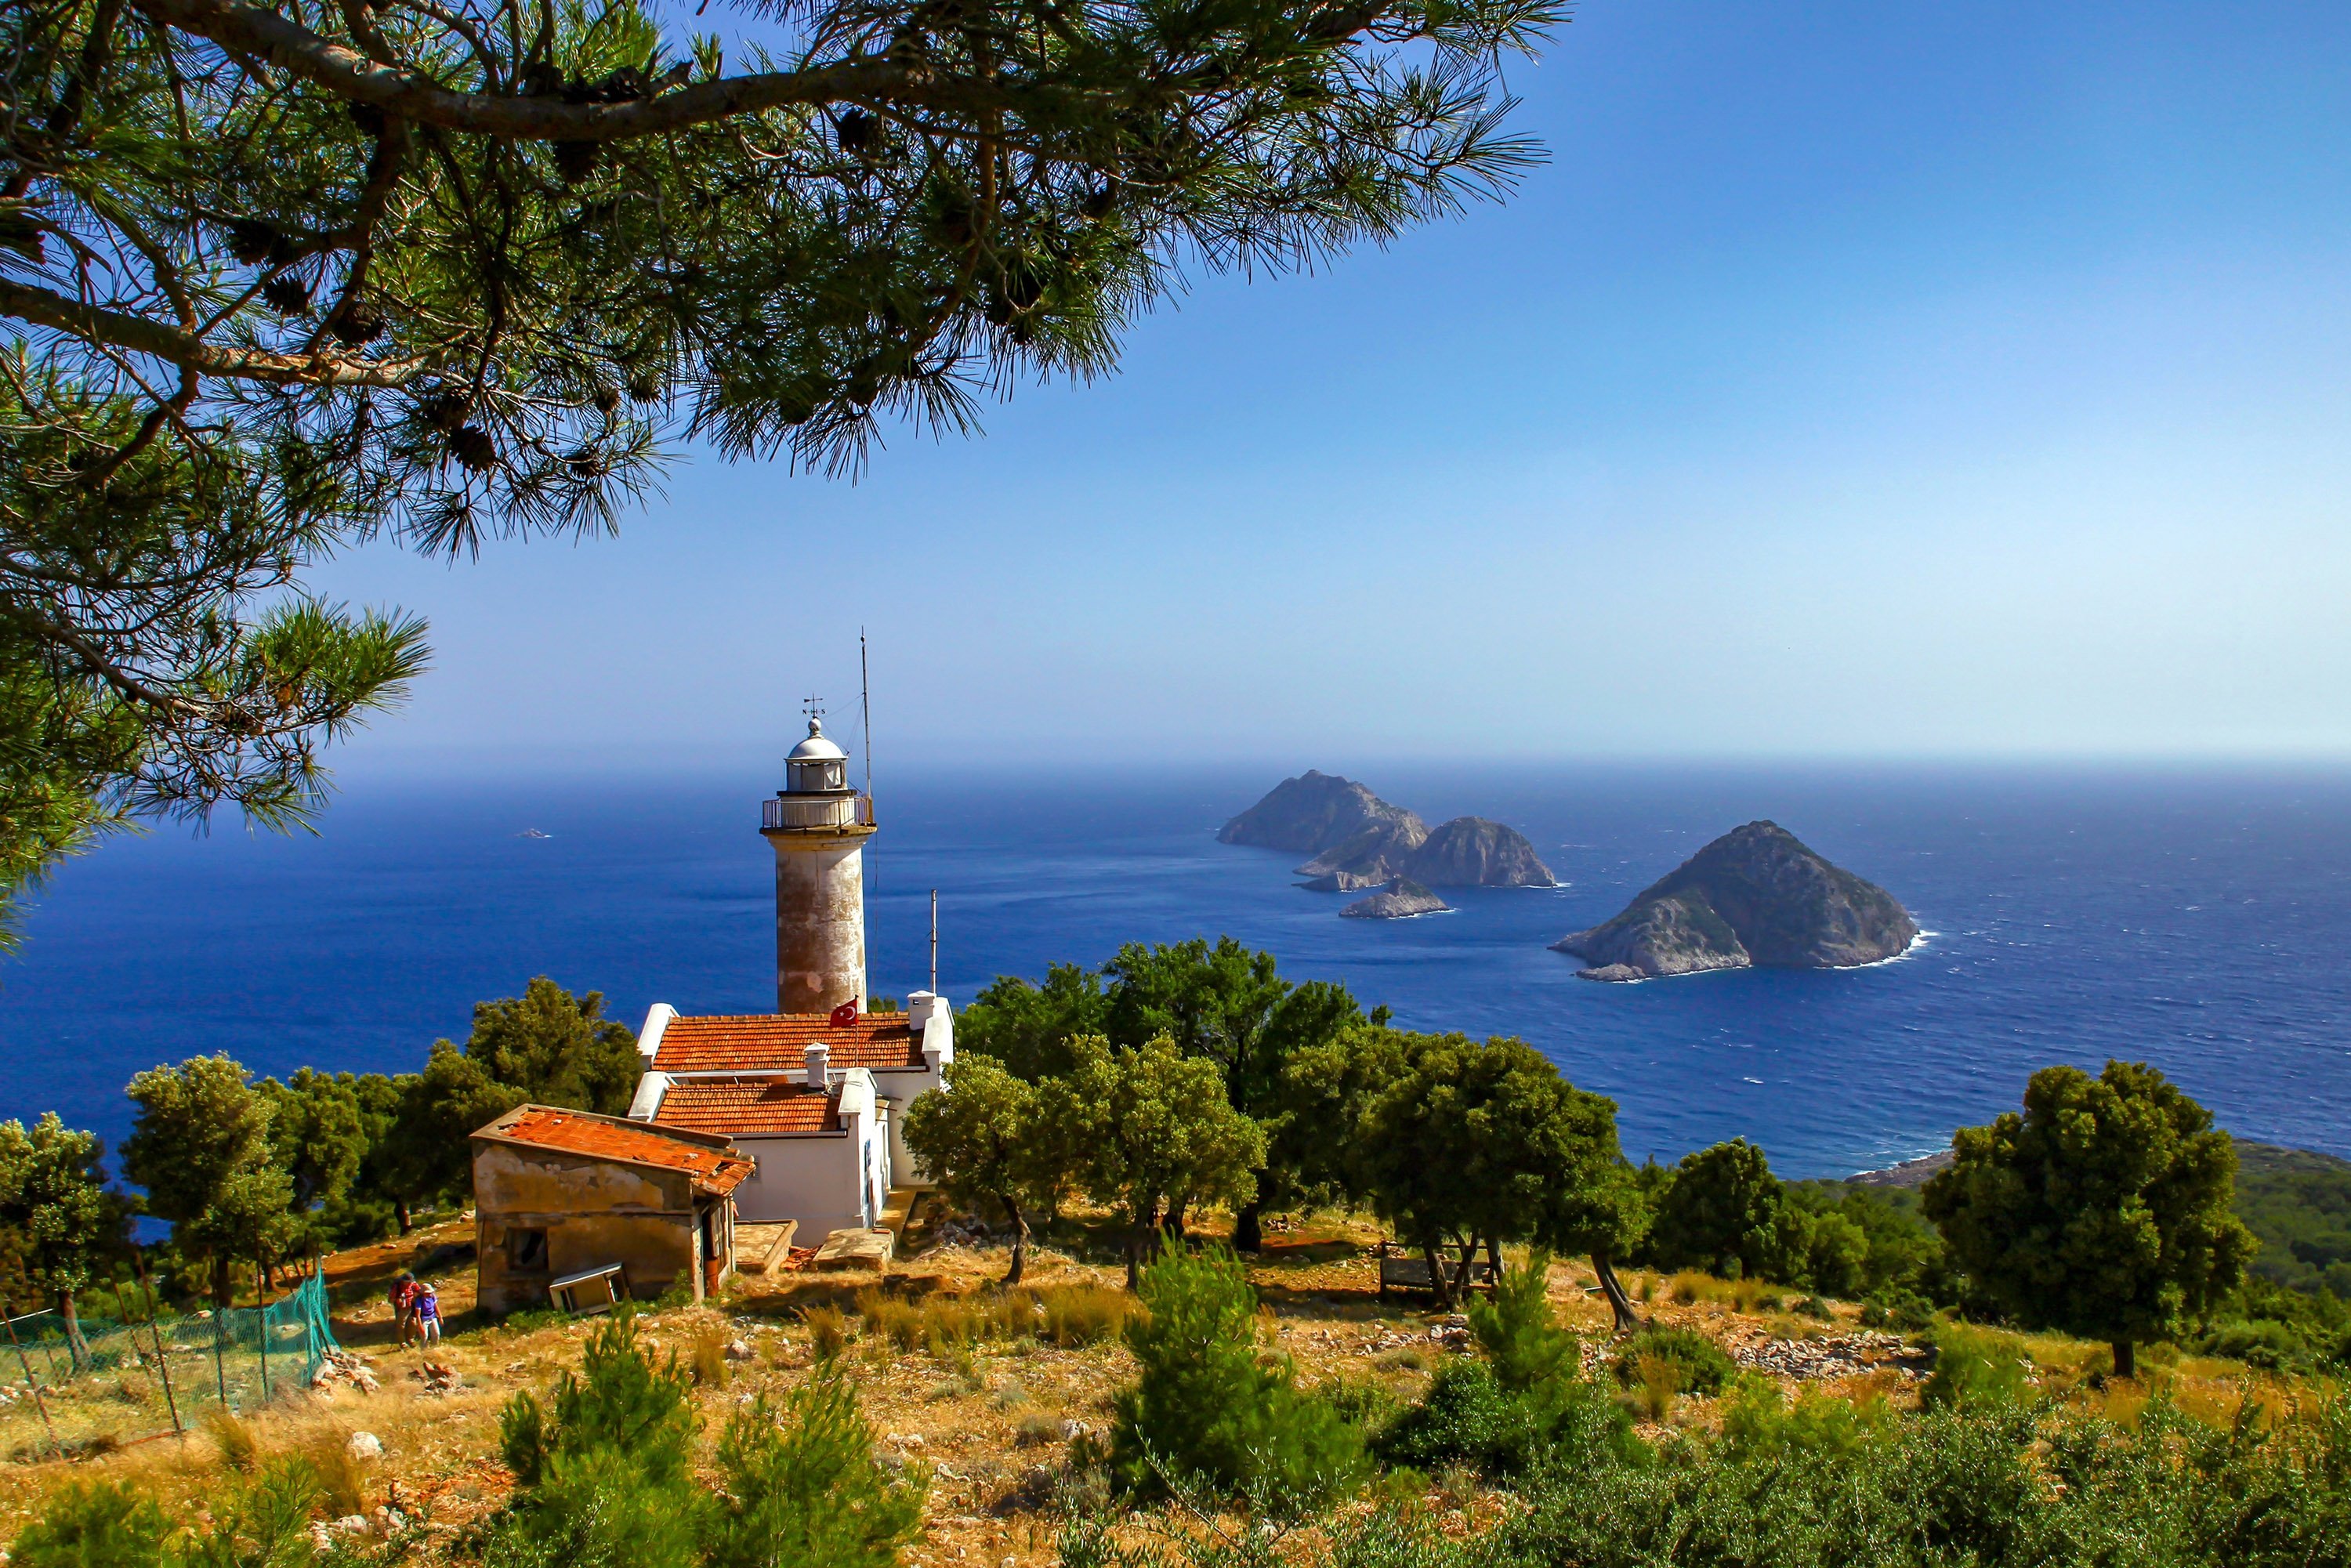 The Gelidonya Lighthouse on the Lycian Way with islands in the background in Antalya. (Shutterstock Photo)